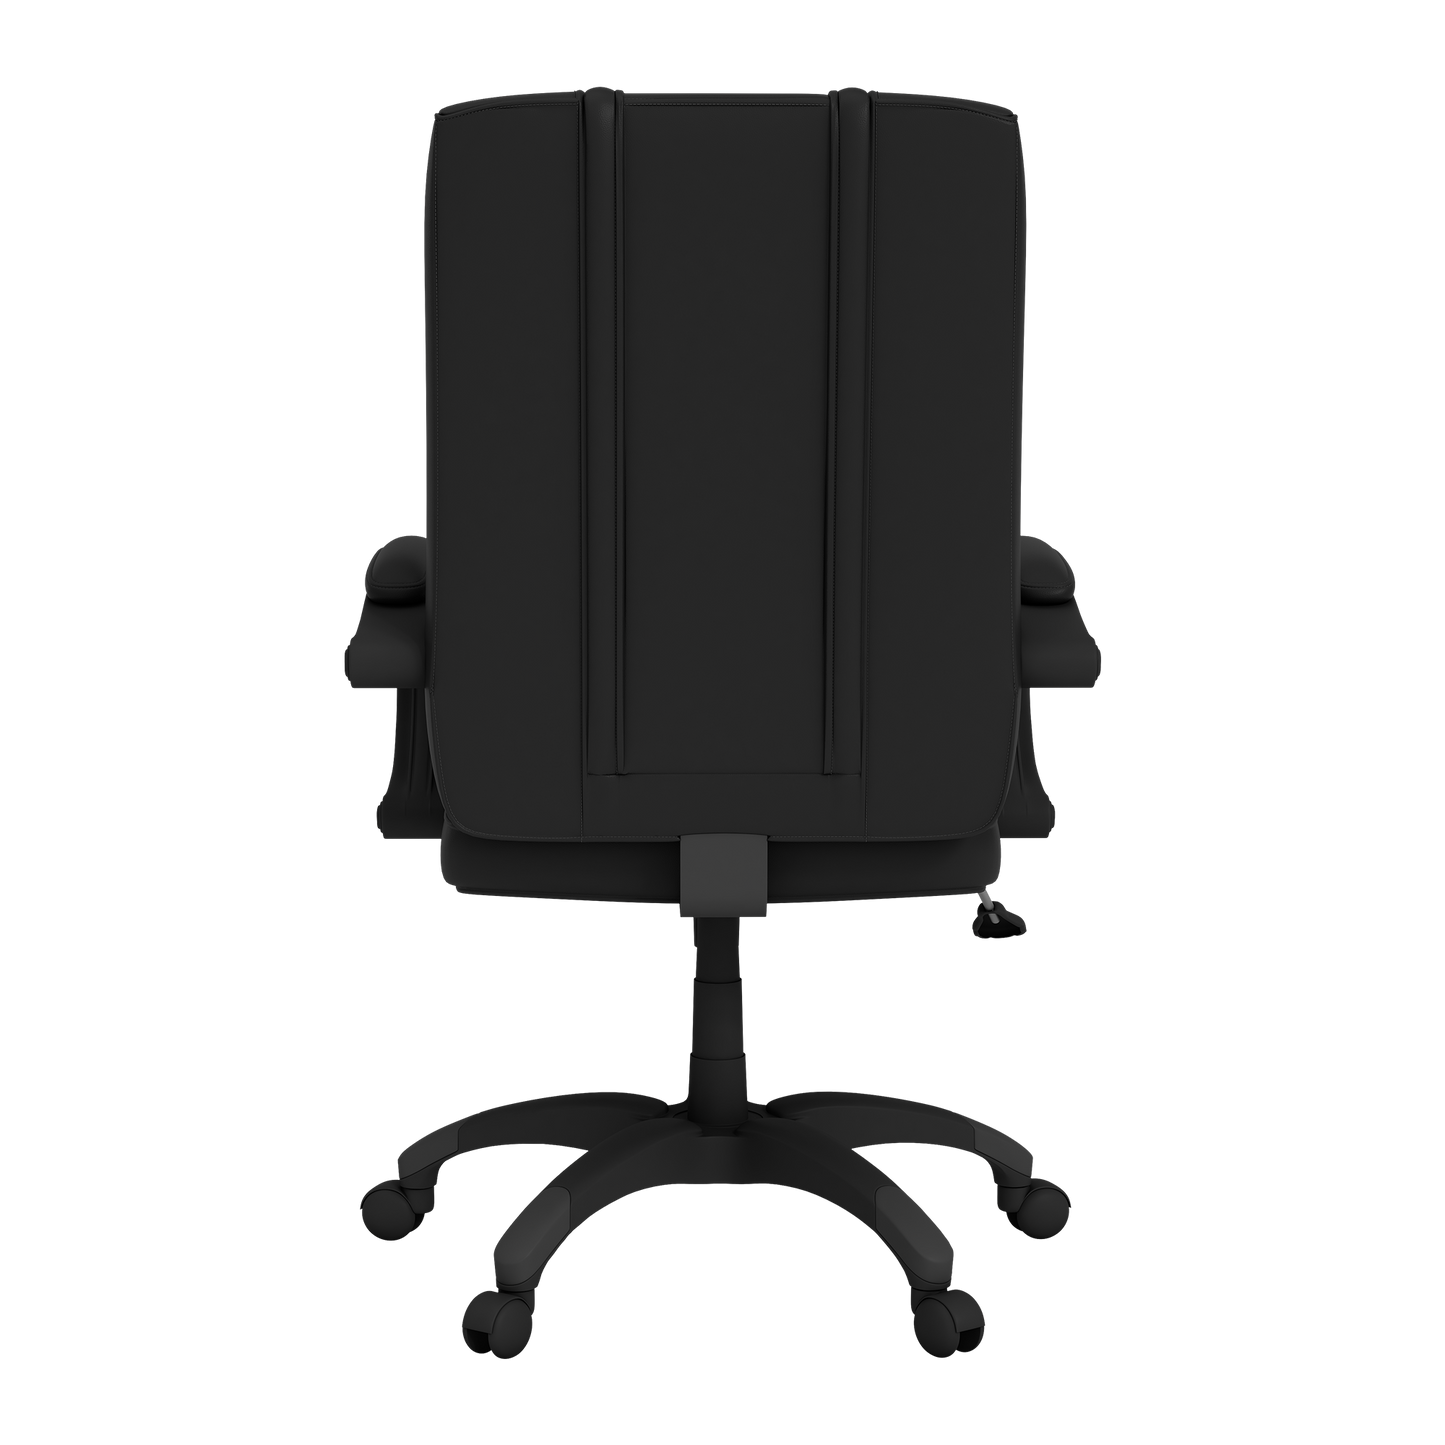 Office Chair 1000 with Memphis Grizzlies Secondary Logo